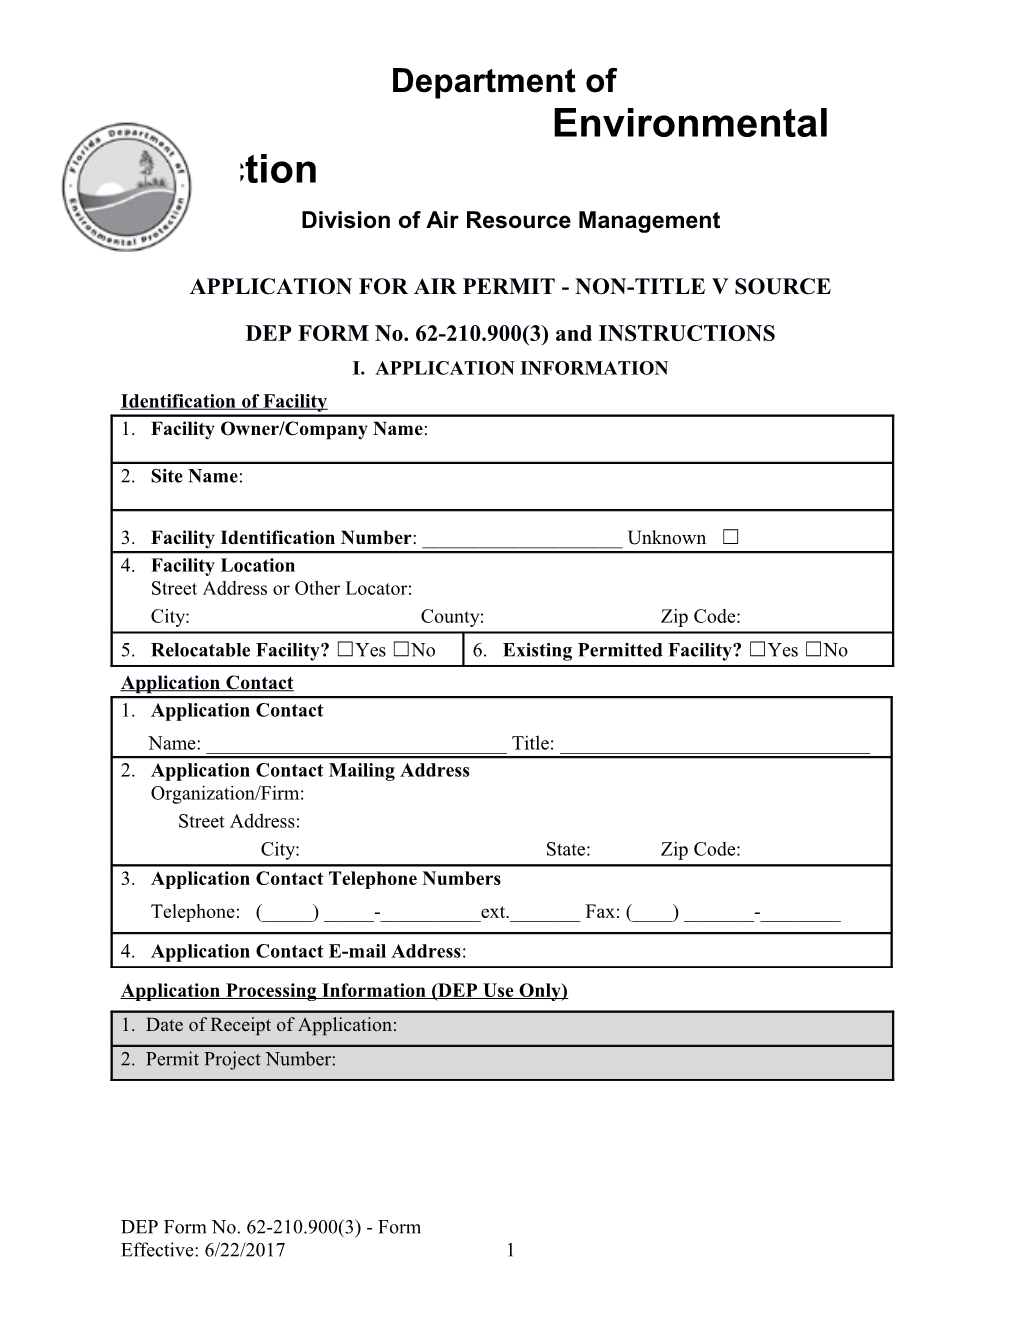 Application for Air Permit - Non-Title V Source